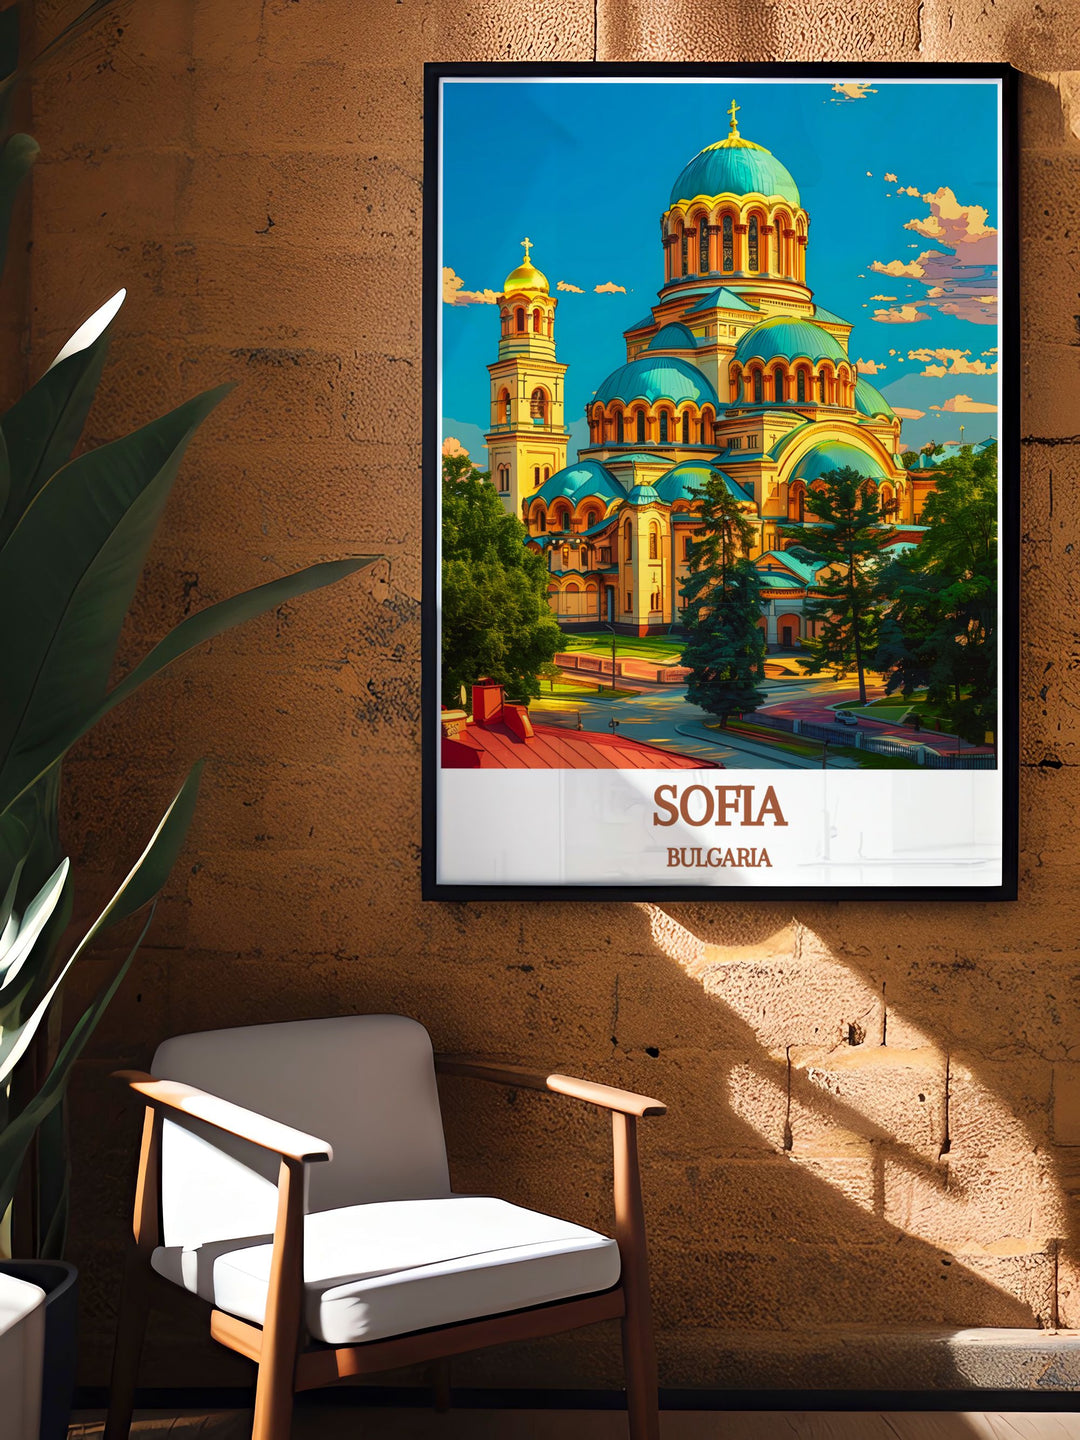 Elegant Sofia Poster featuring BULGARIA St. Alexander Nevsky Cathedral an ideal gift for birthdays anniversaries or Christmas bringing the cultural heritage of Bulgaria into your home.